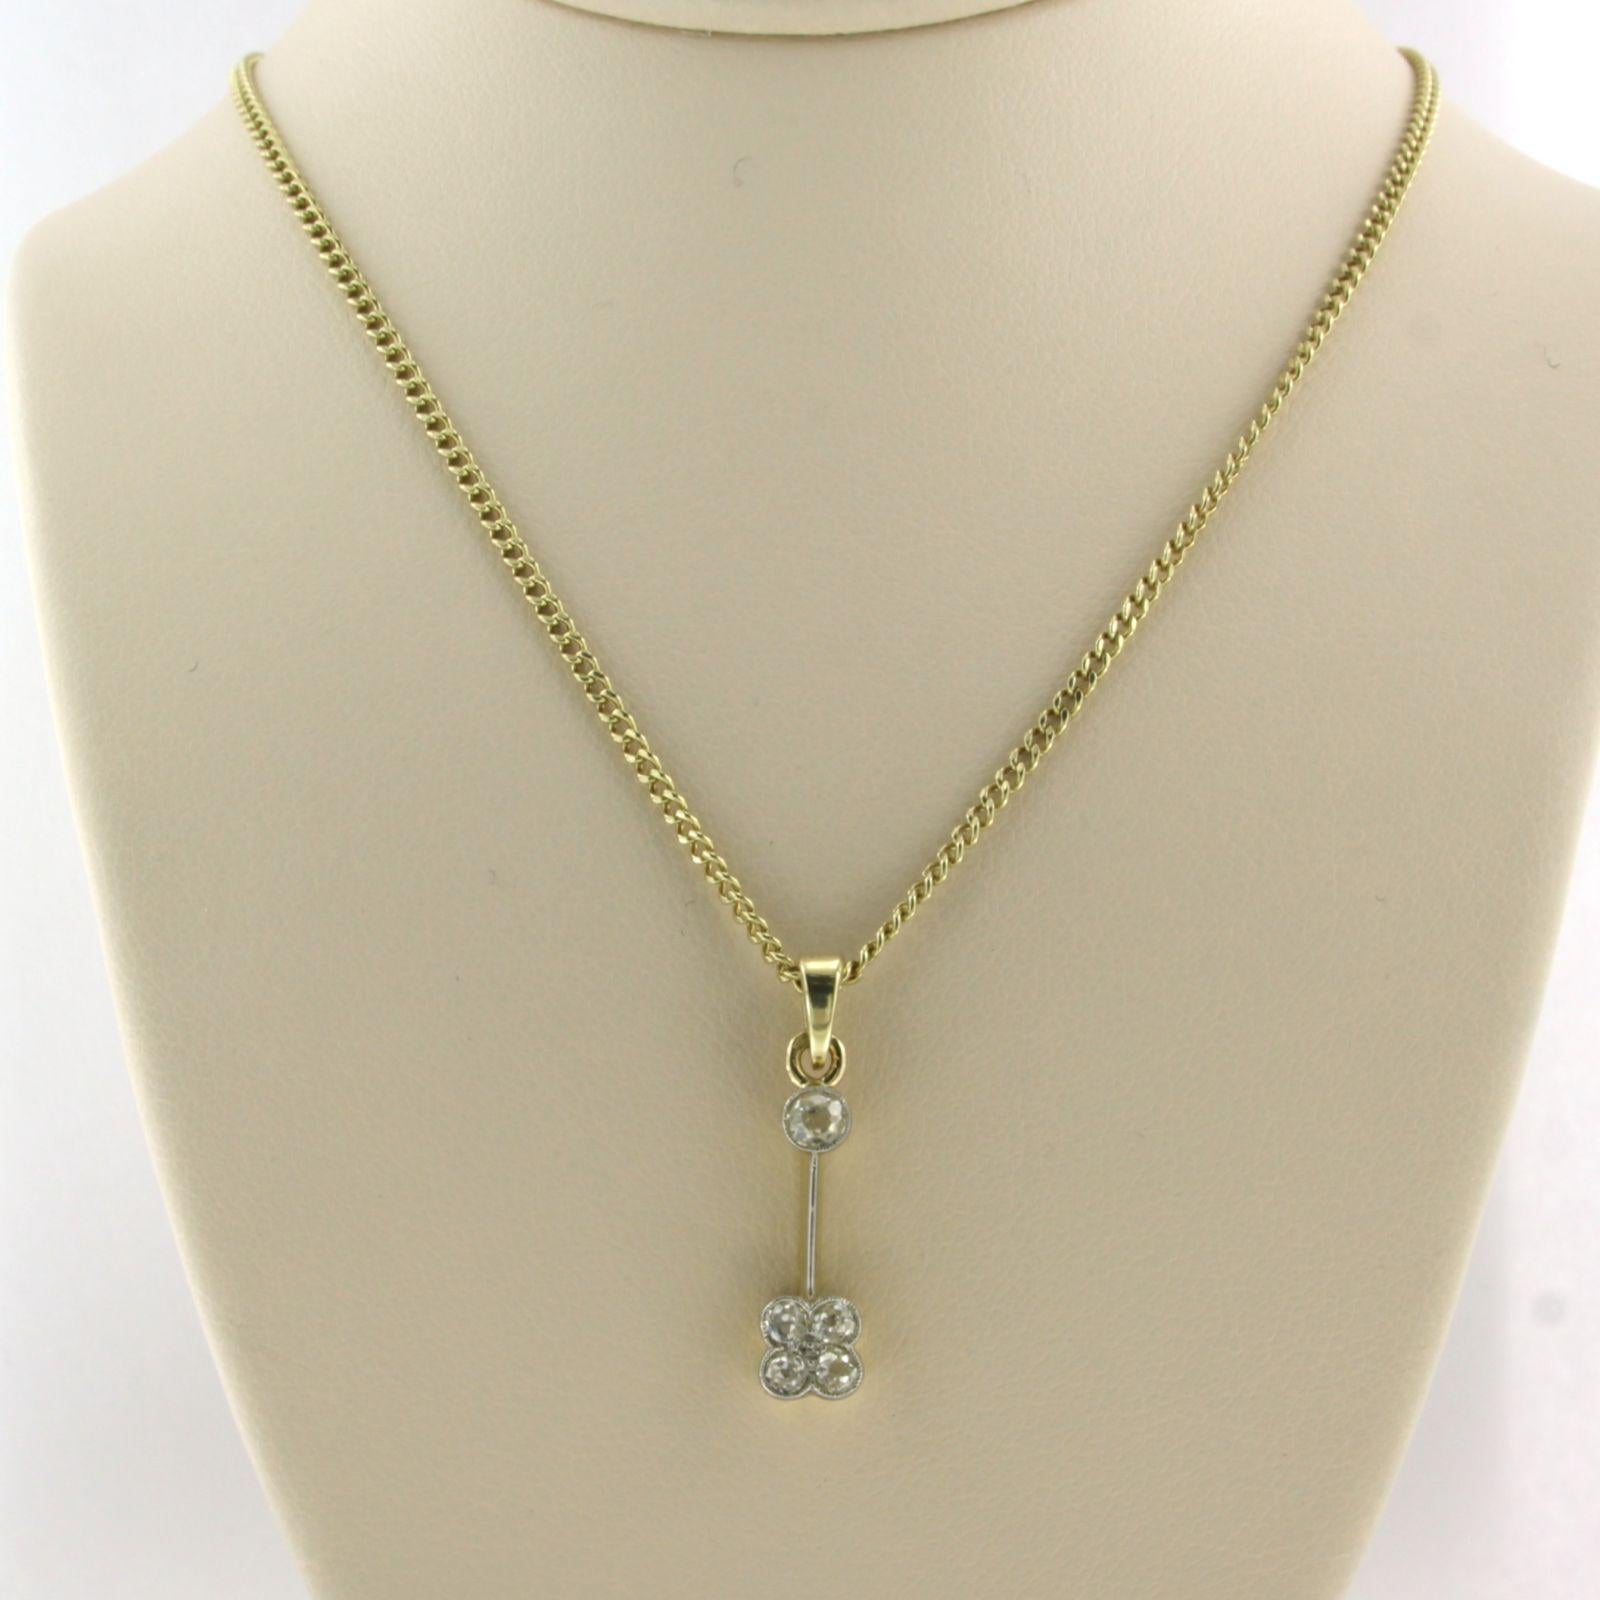 14k yellow gold necklace with a bicolor gold pendant set with old mine cut diamonds. 0.30ct - F/G - SI - 50 cm long

detailed description

the length of the necklace is 50 cm by 1.5 mm wide

size of the pendant 2.3 cm x 0.6 cm wide

weight 5.7